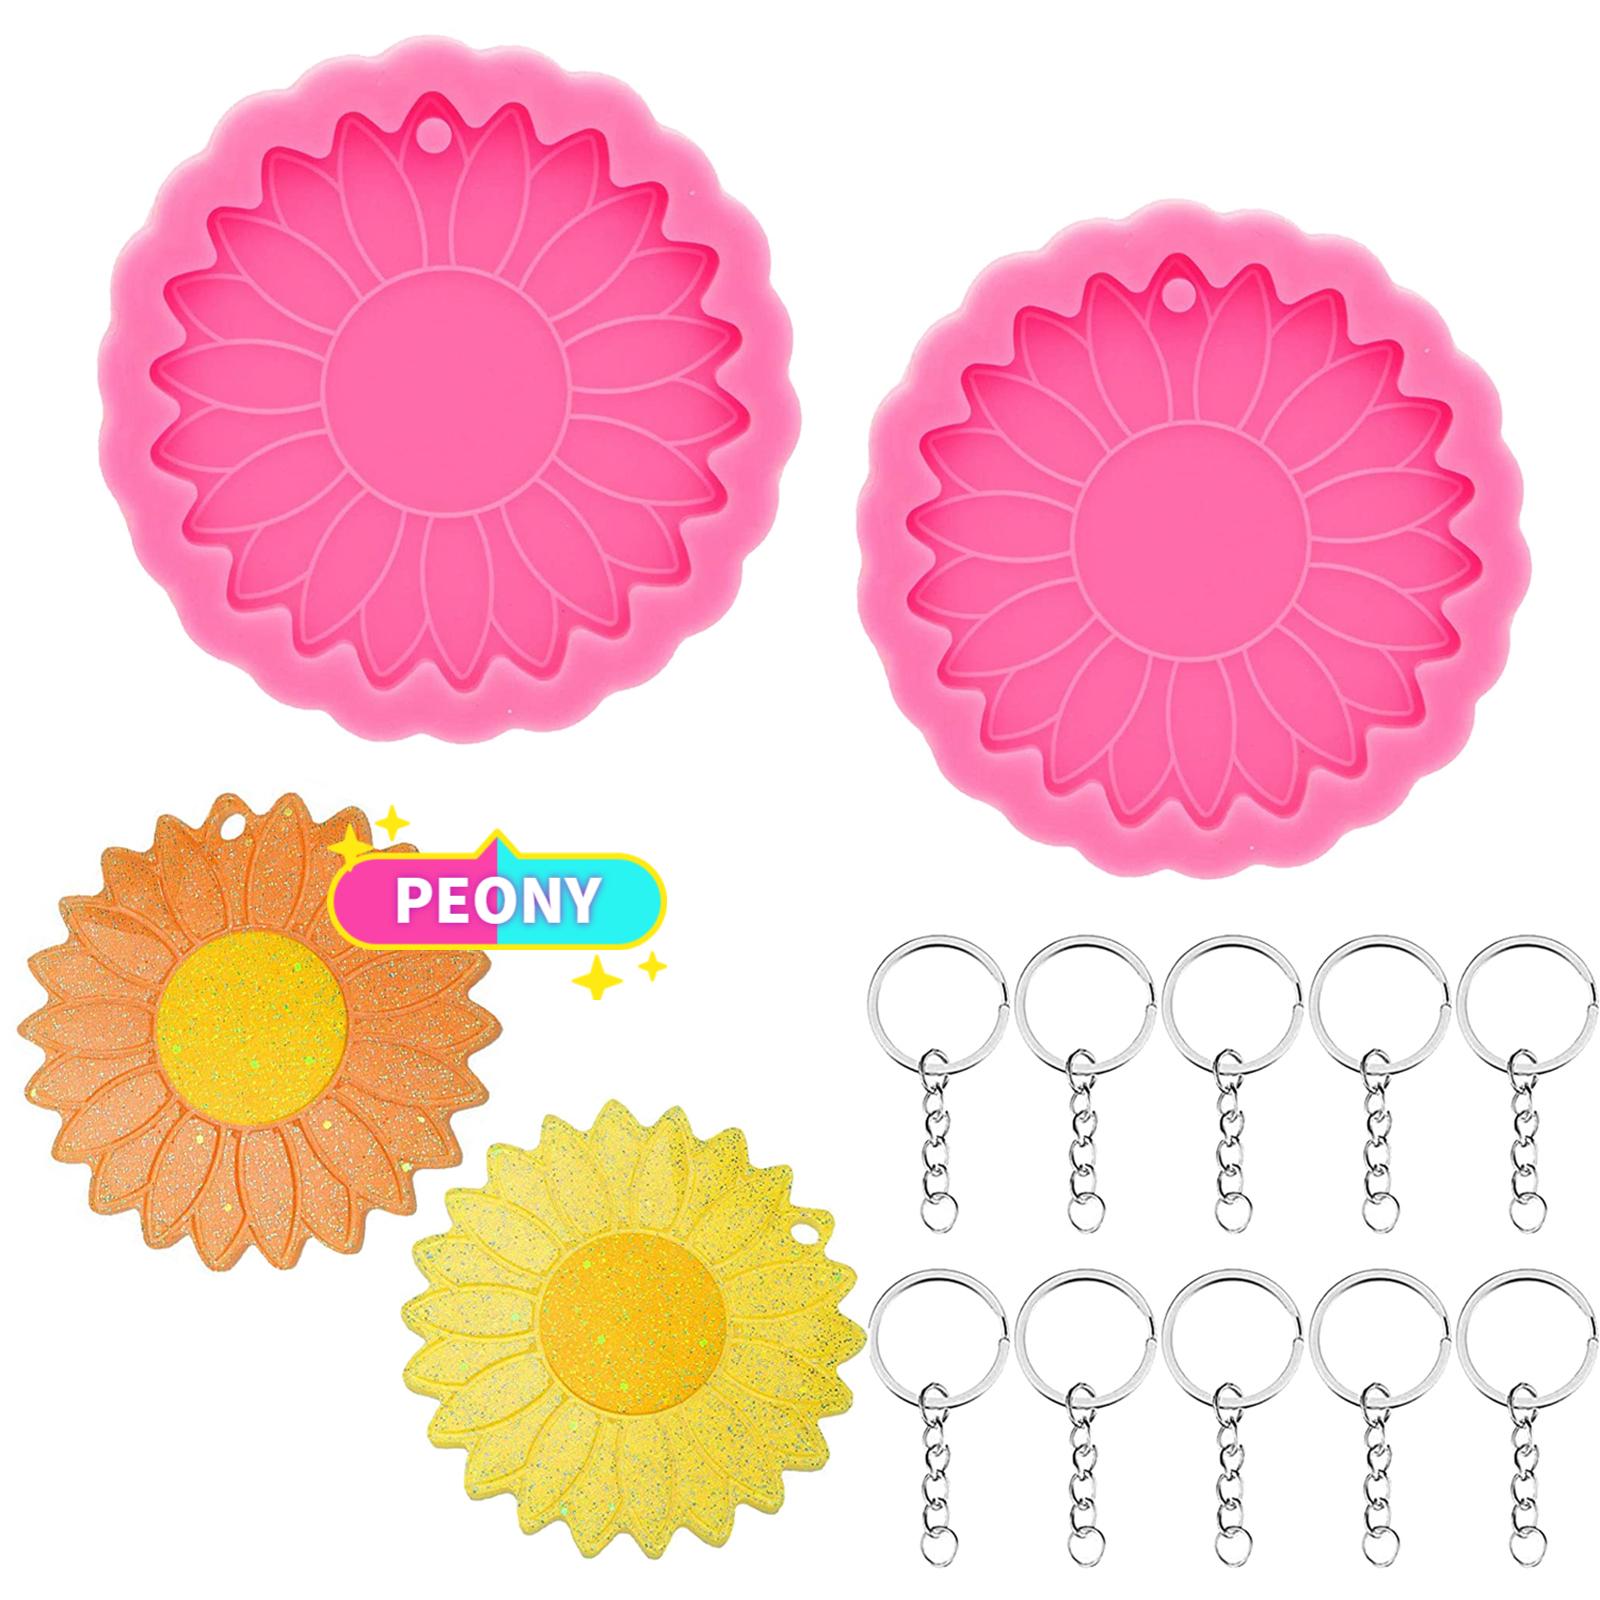 PEONY 12pack Pendants Making Glossy Sunflower Resin Mold for DIY Jewelry Flower Keychain 8 cm/ 3.14 Inch Casting Mold with Hole Pendant Epoxy Resin Crafts Silicone Mold